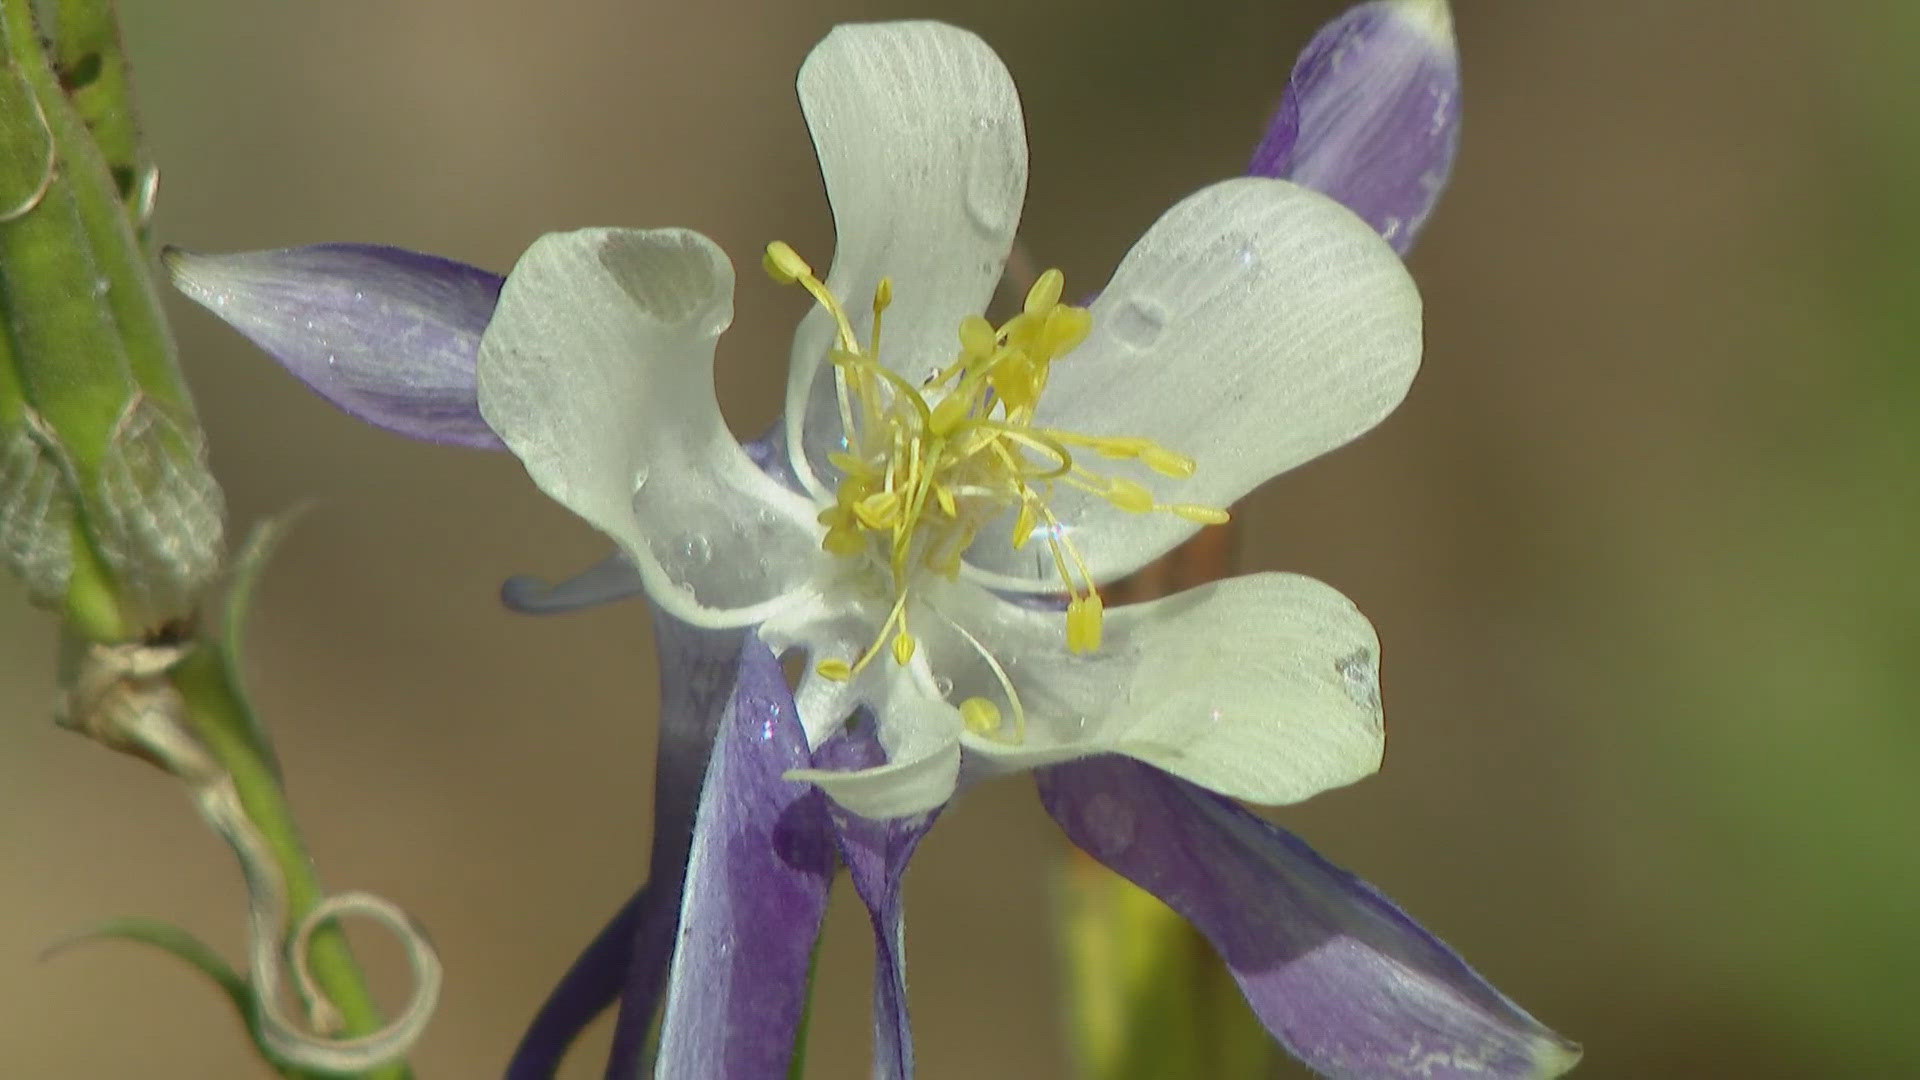 Here's an app recommendation to help identify the flowers you spot on your hikes.